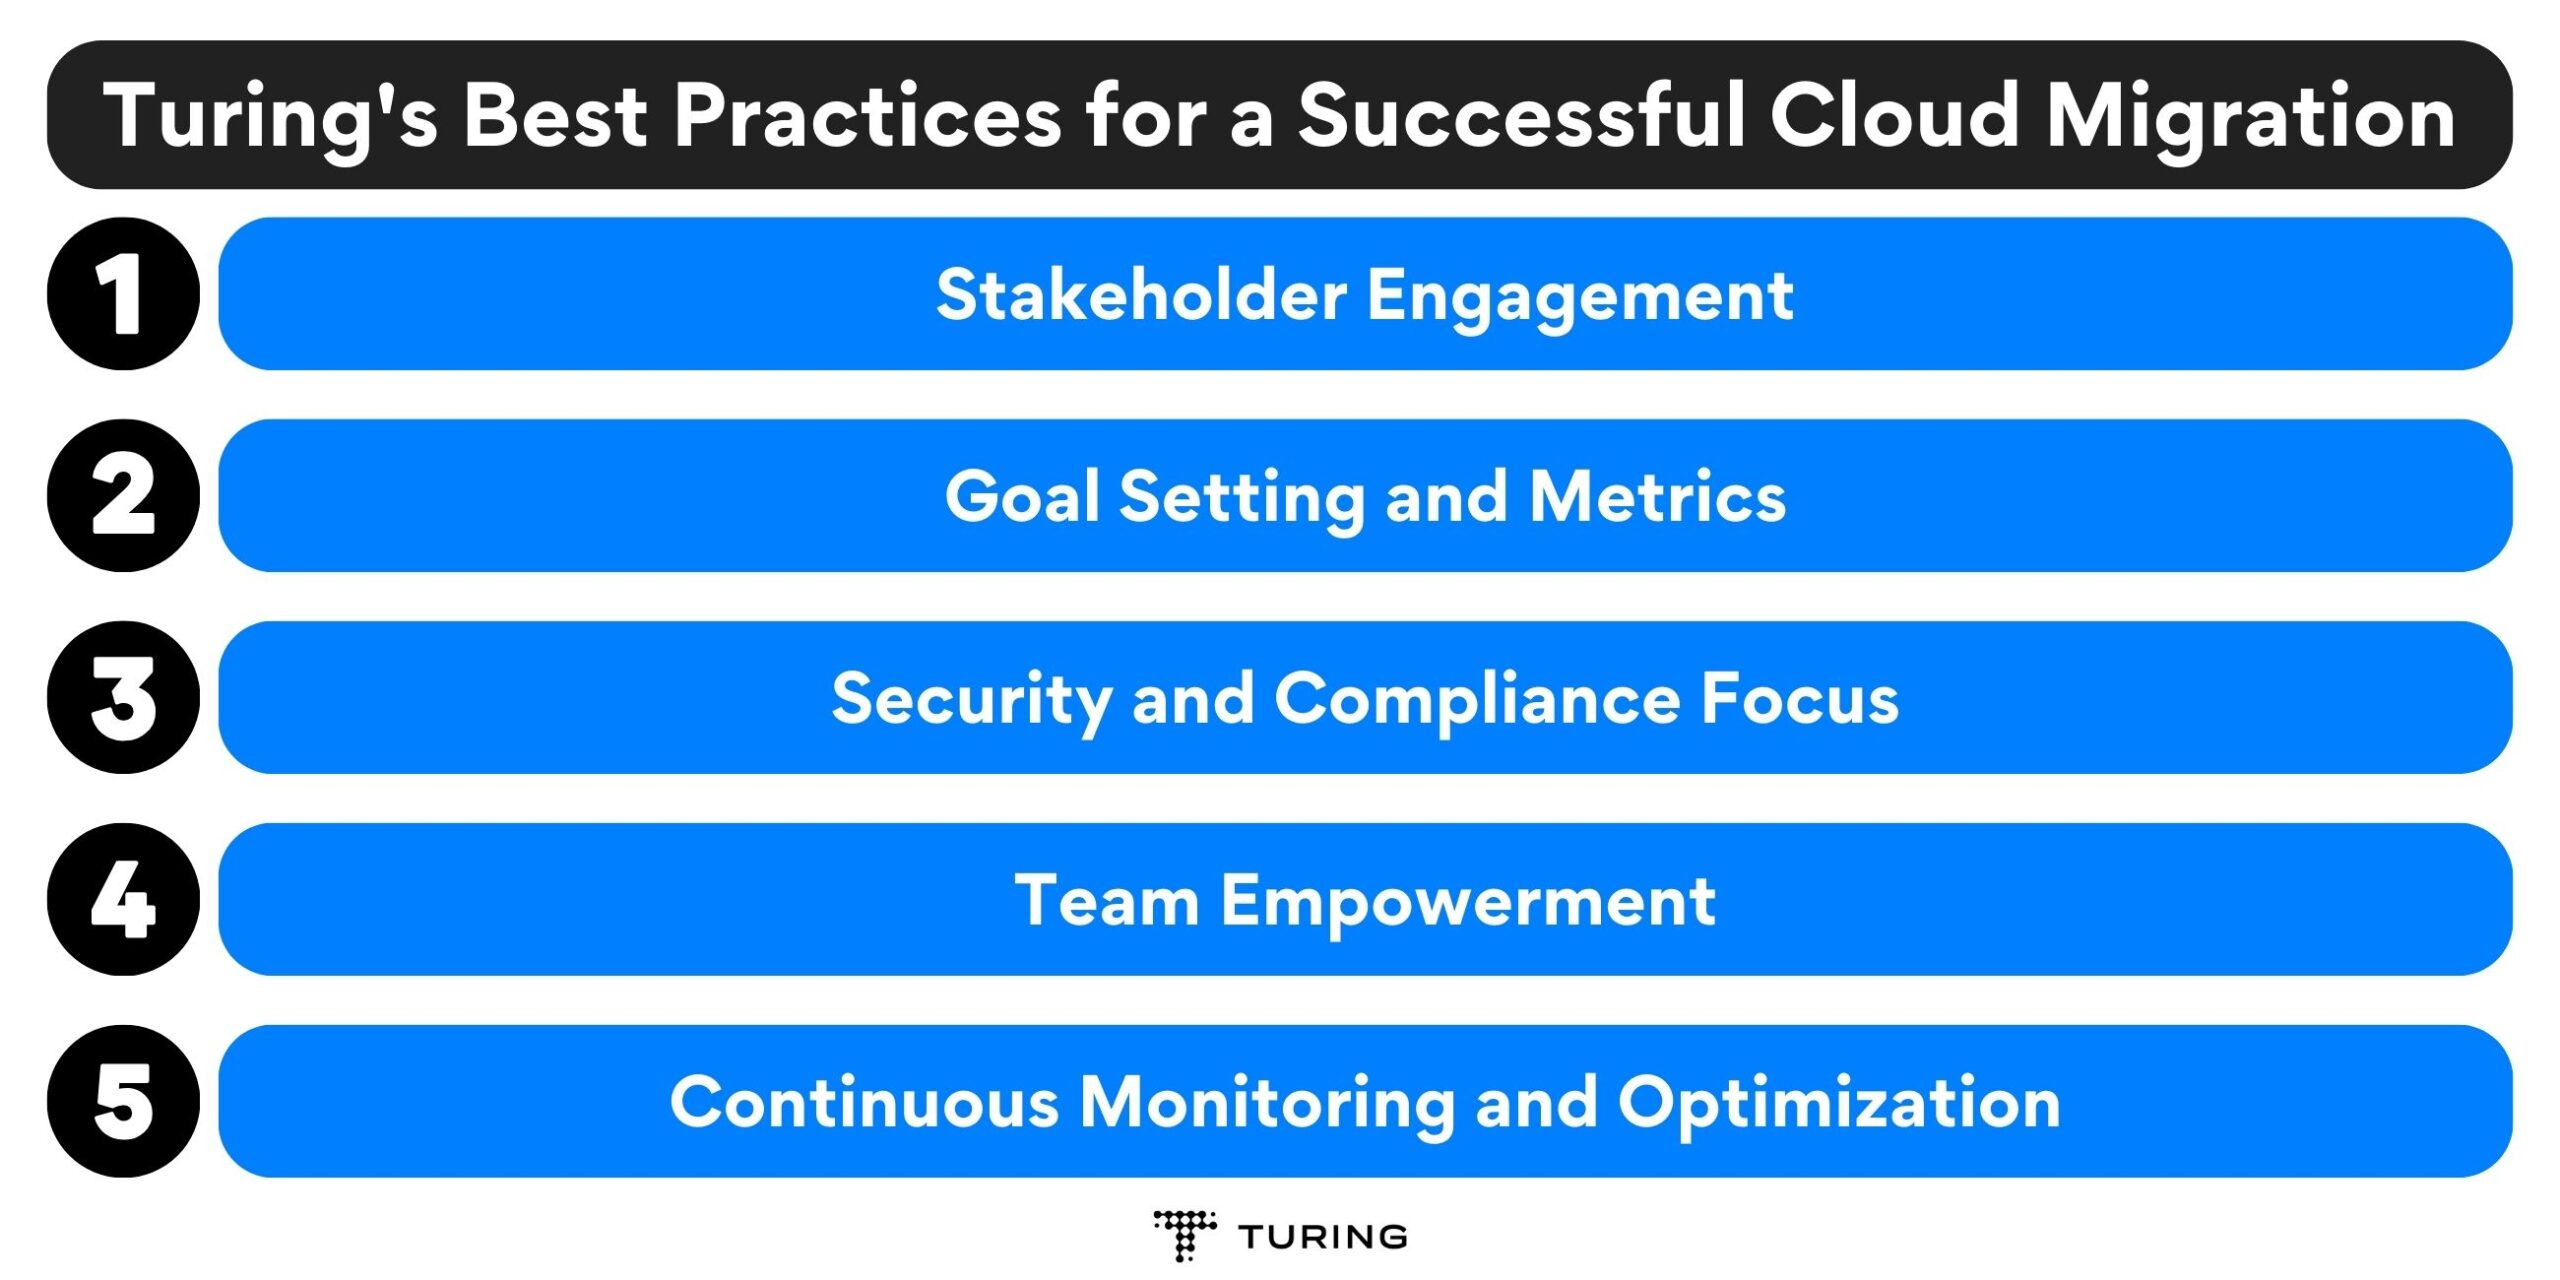 Cloud assessment: Turing's Best Practices for a Successful Cloud Migration